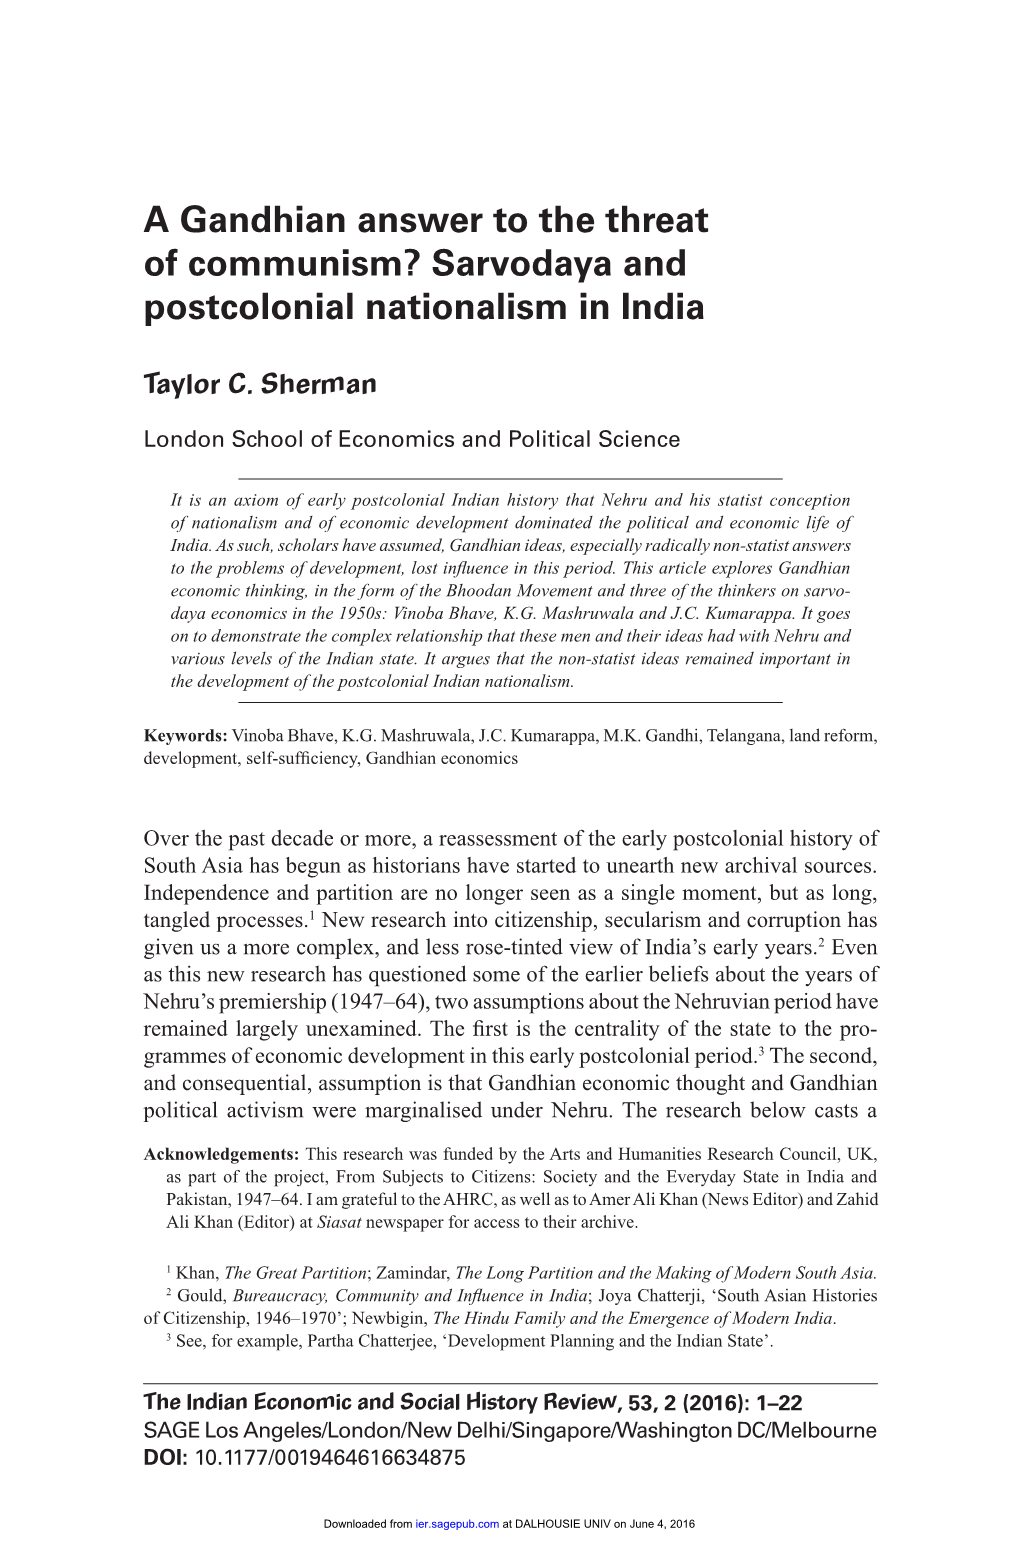 A Gandhian Answer to the Threat of Communism? Sarvodaya and Postcolonial Nationalism in India